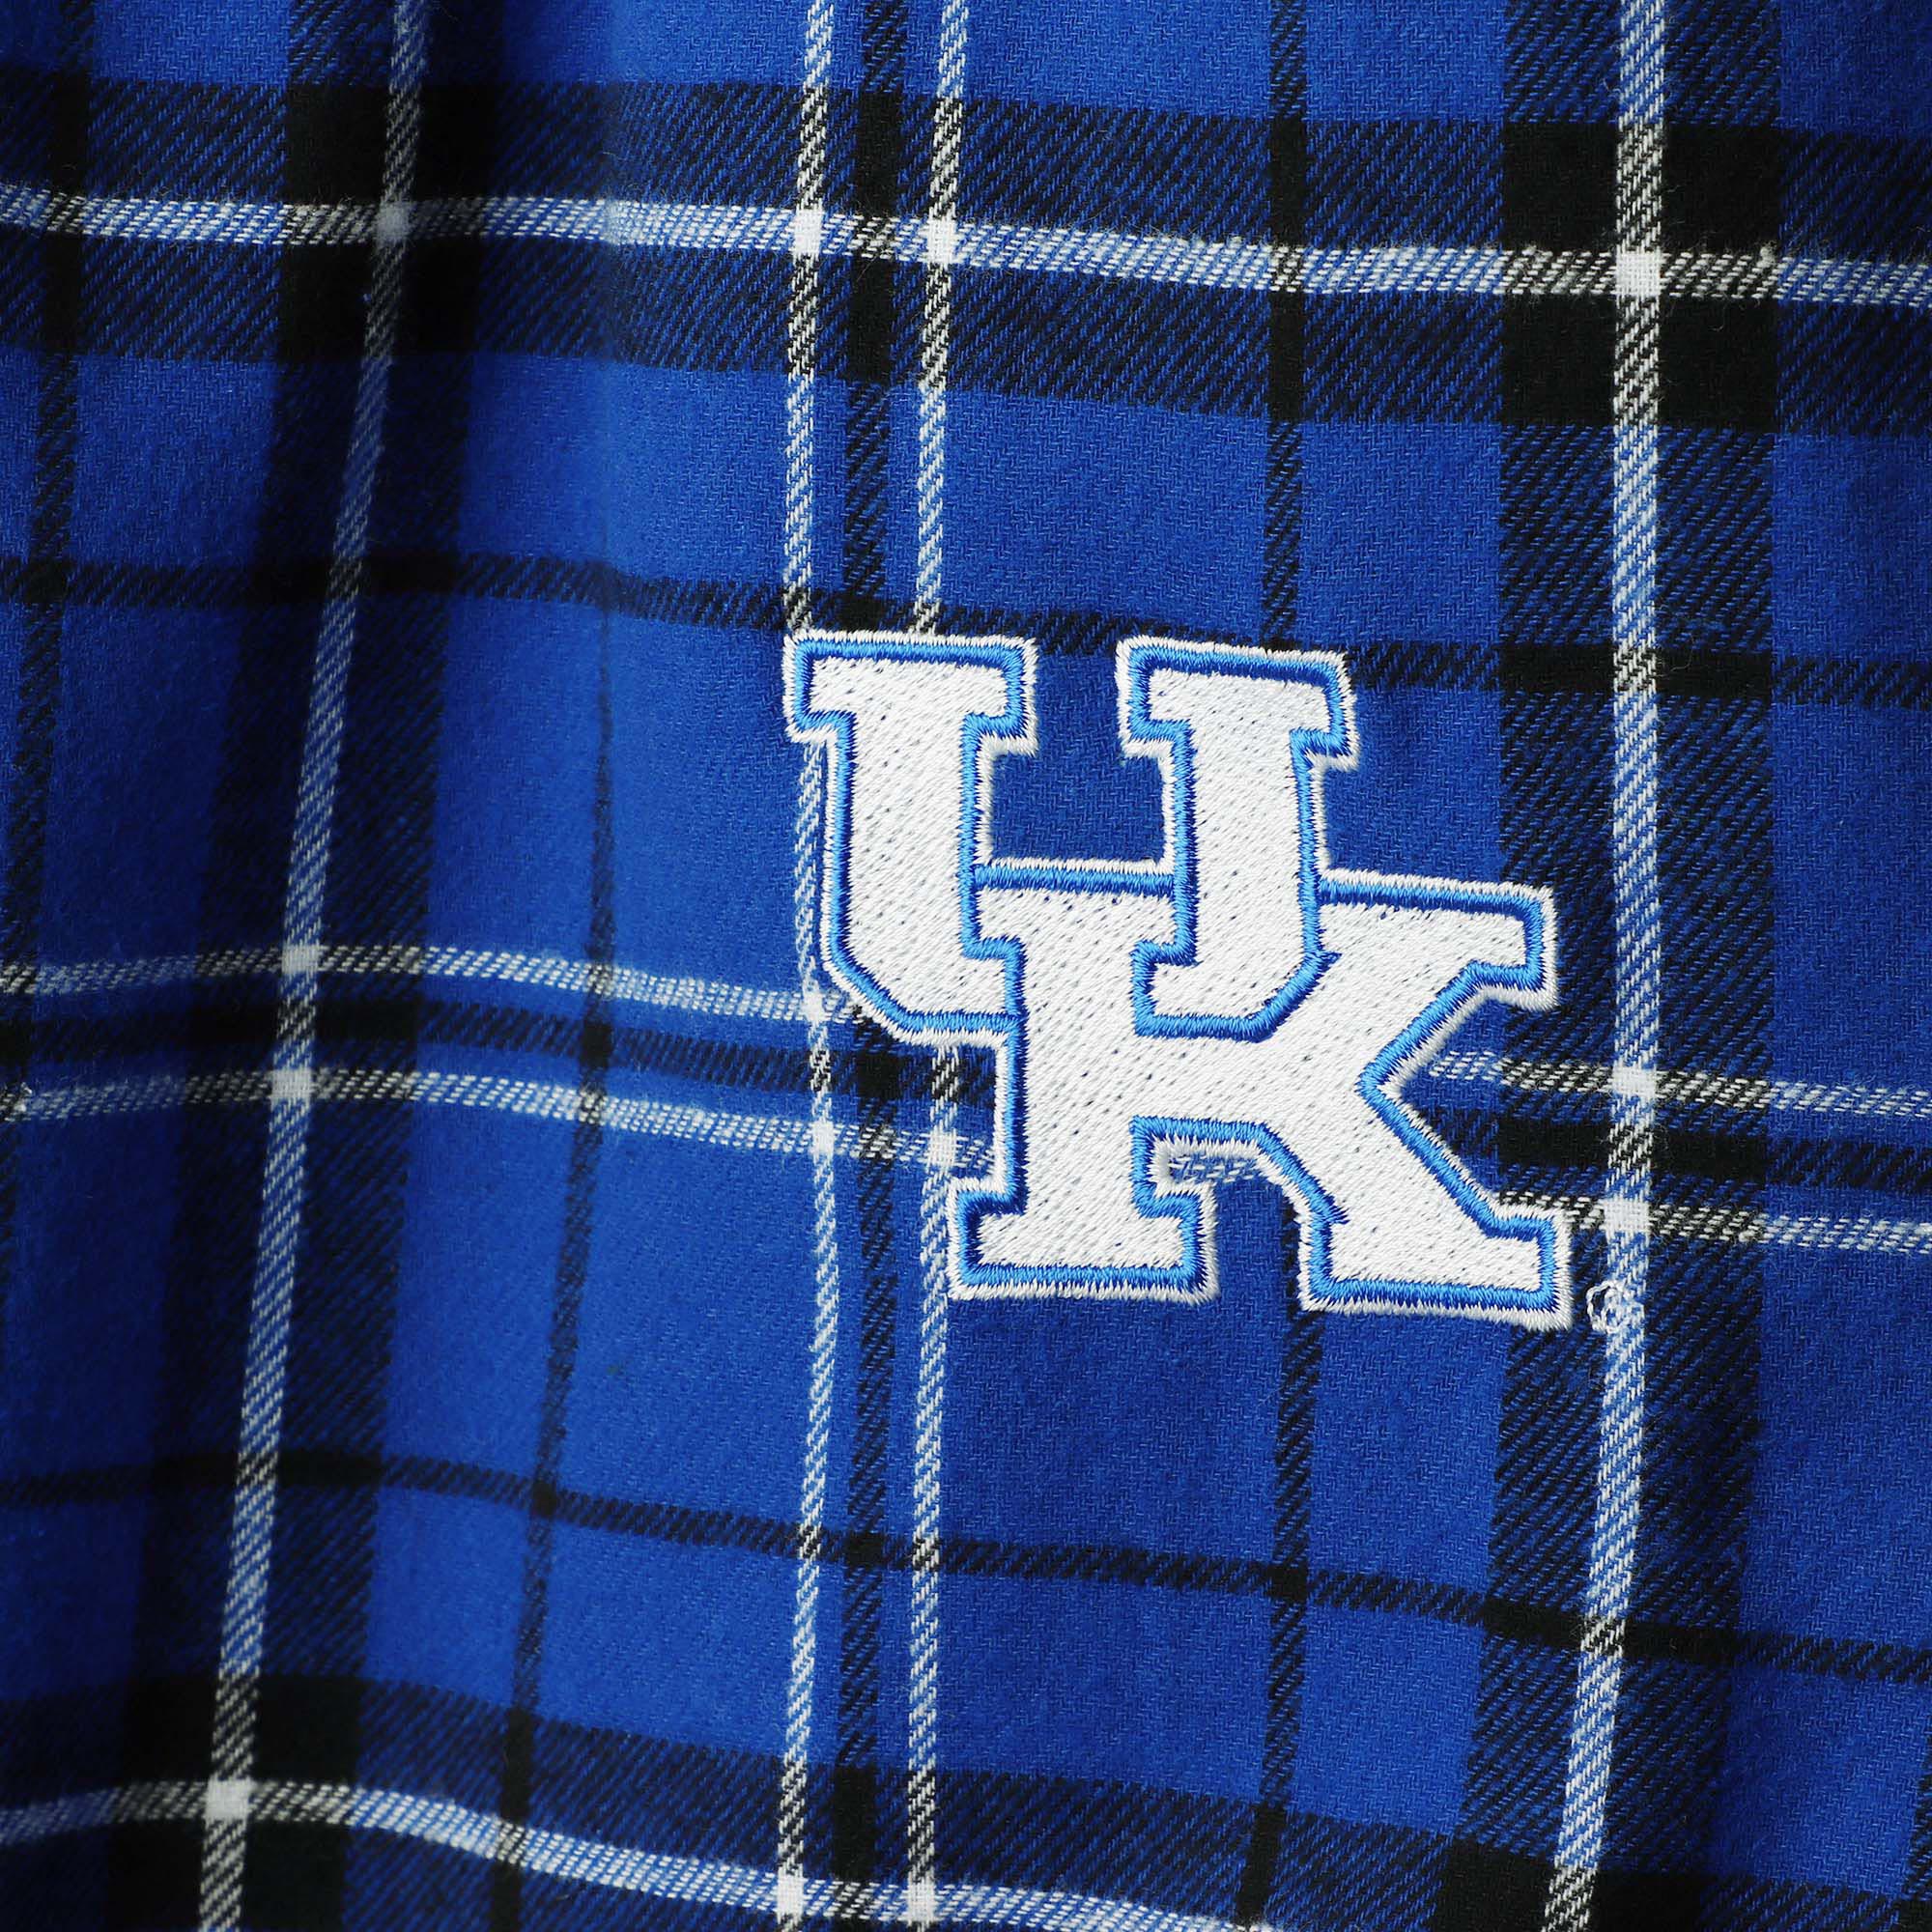 Men's Concepts Sport Royal/Black Kentucky Wildcats Ultimate Flannel Pants - image 3 of 3